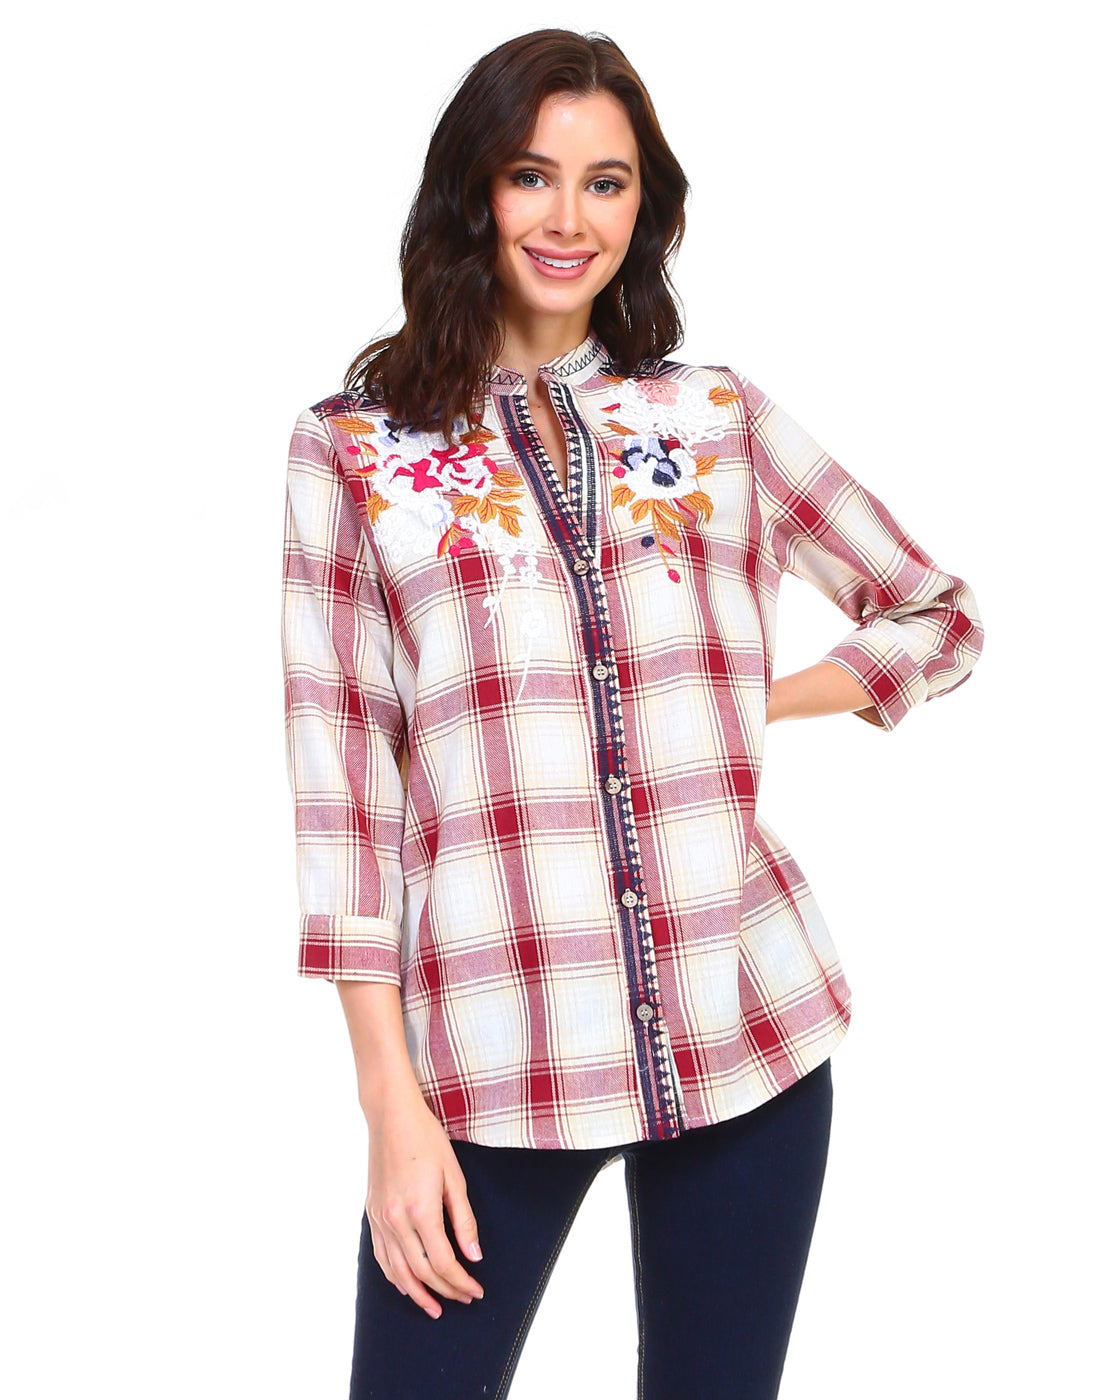 Penelope Cotton Plaid Top with Embroidery